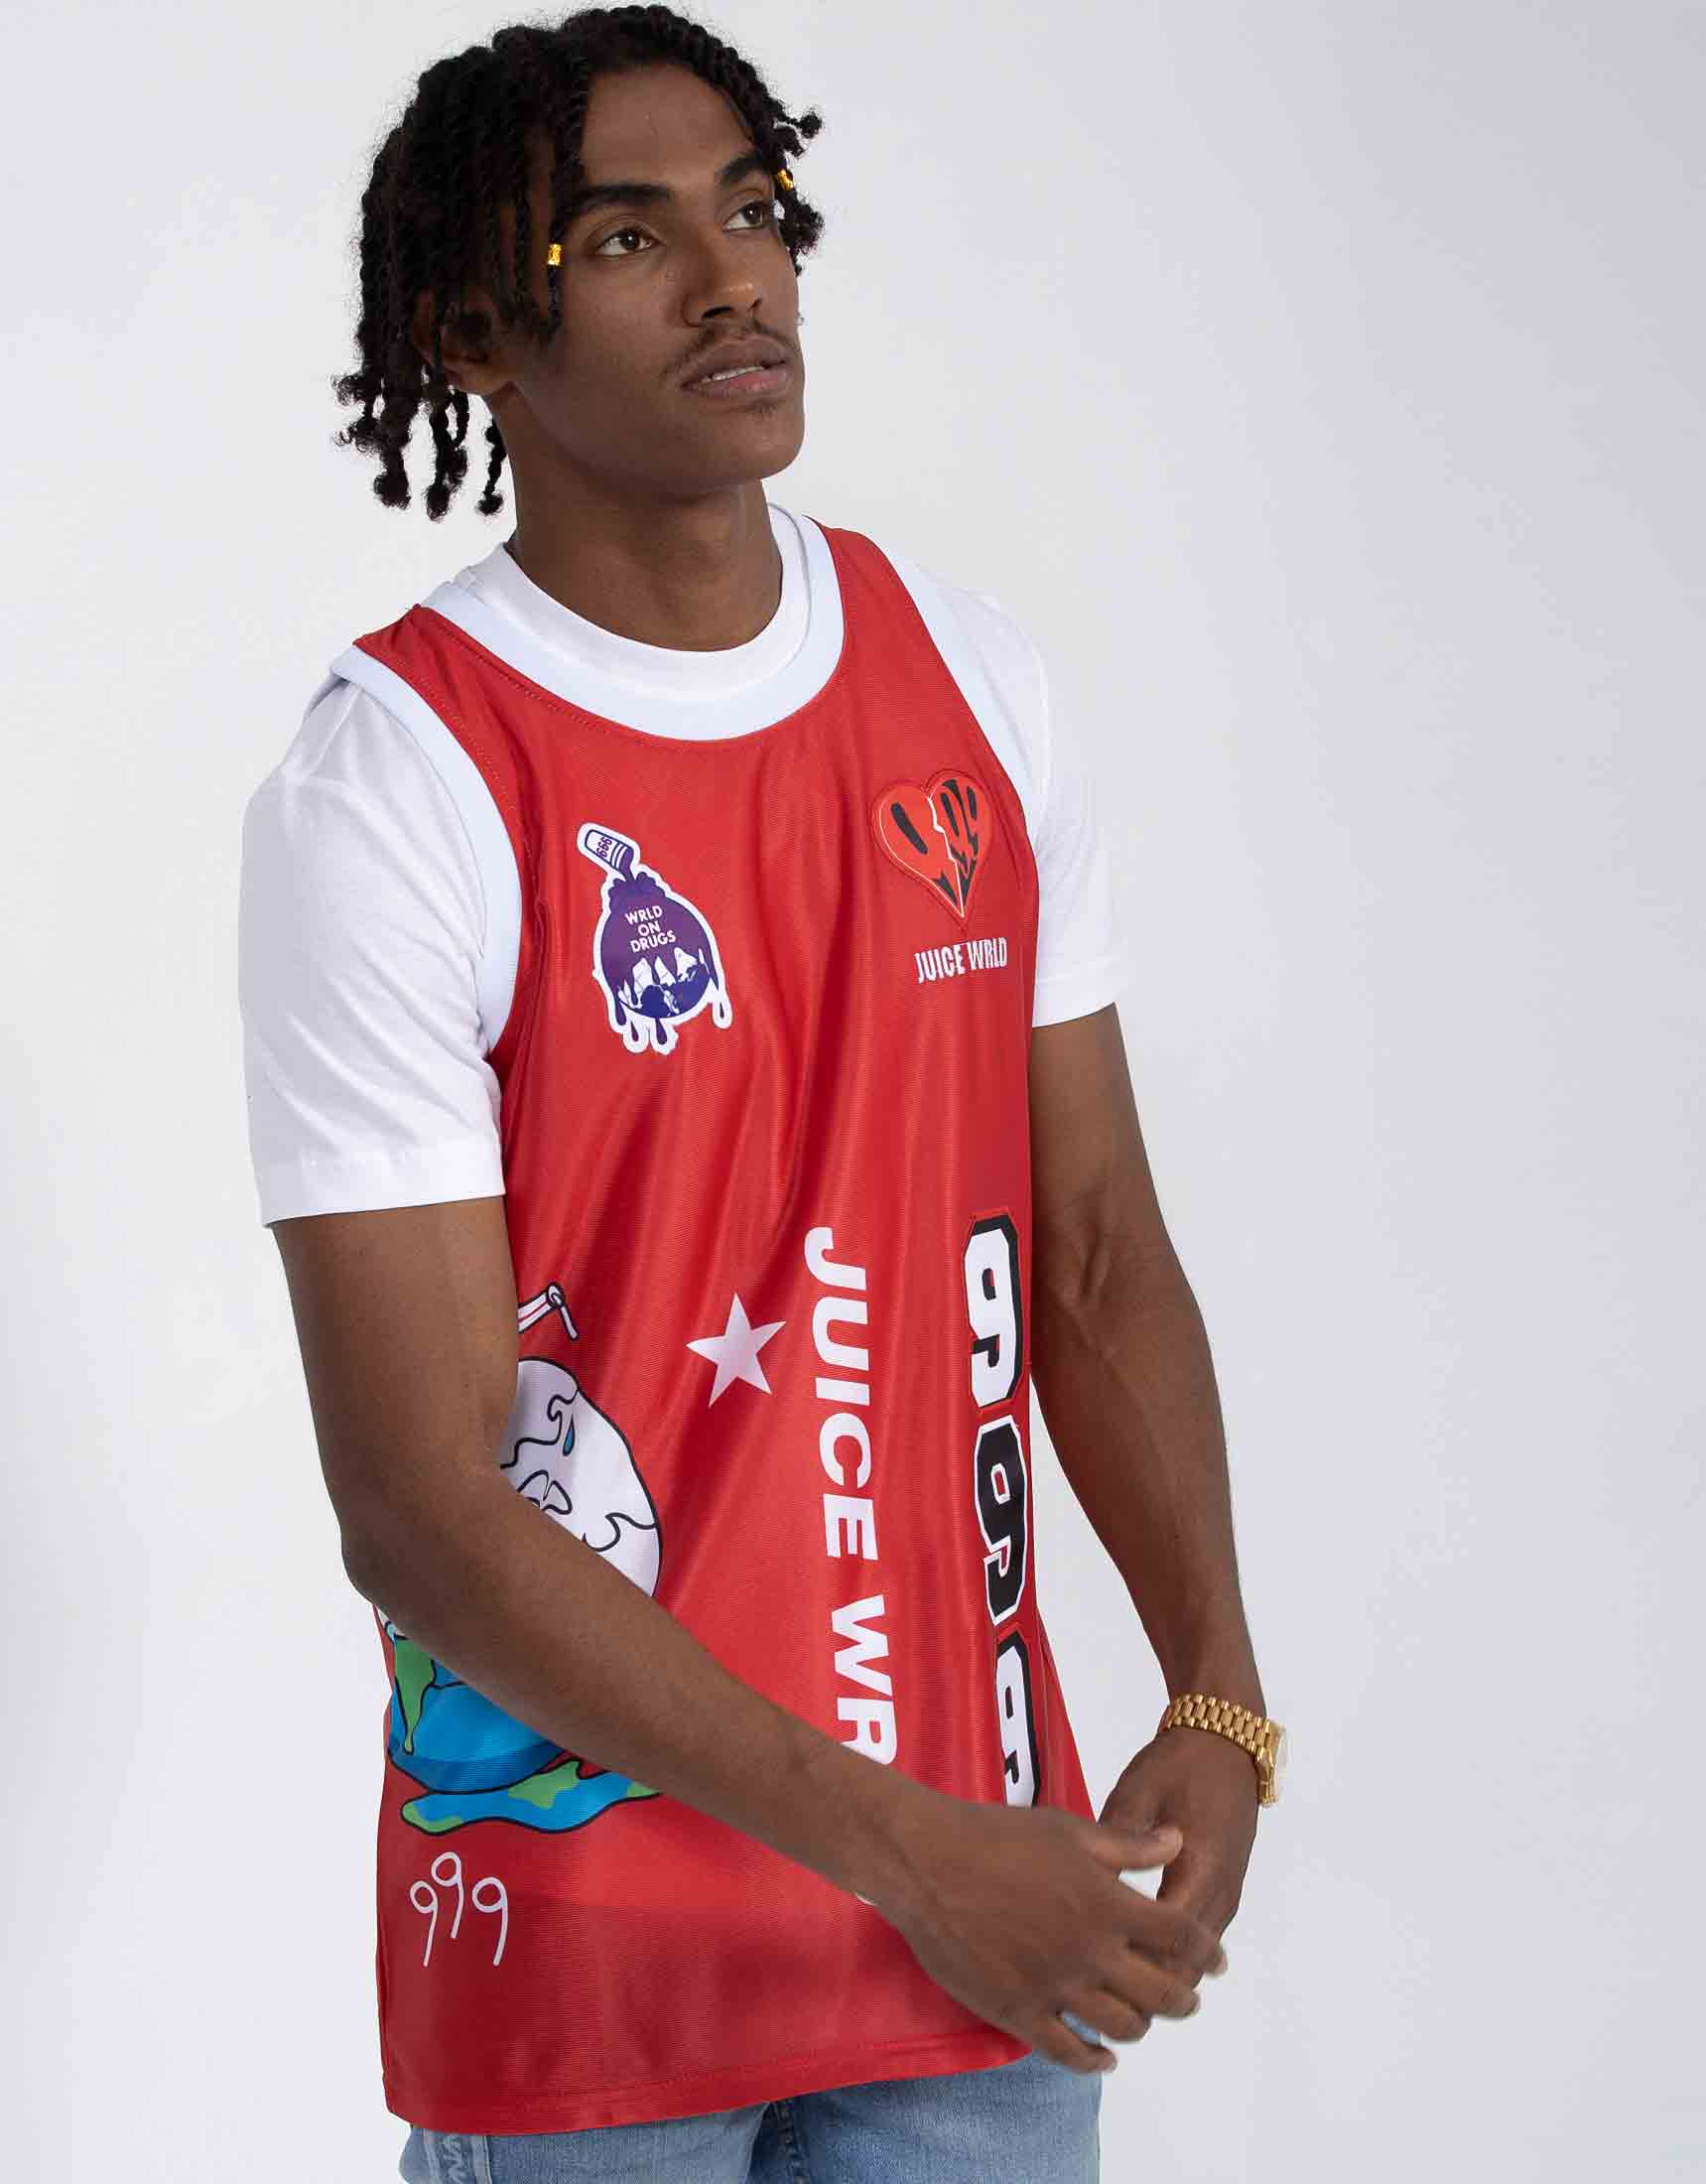 Juicy Wrld 999 Tribute Edition Basketball Jersey – 99Jersey®: Your